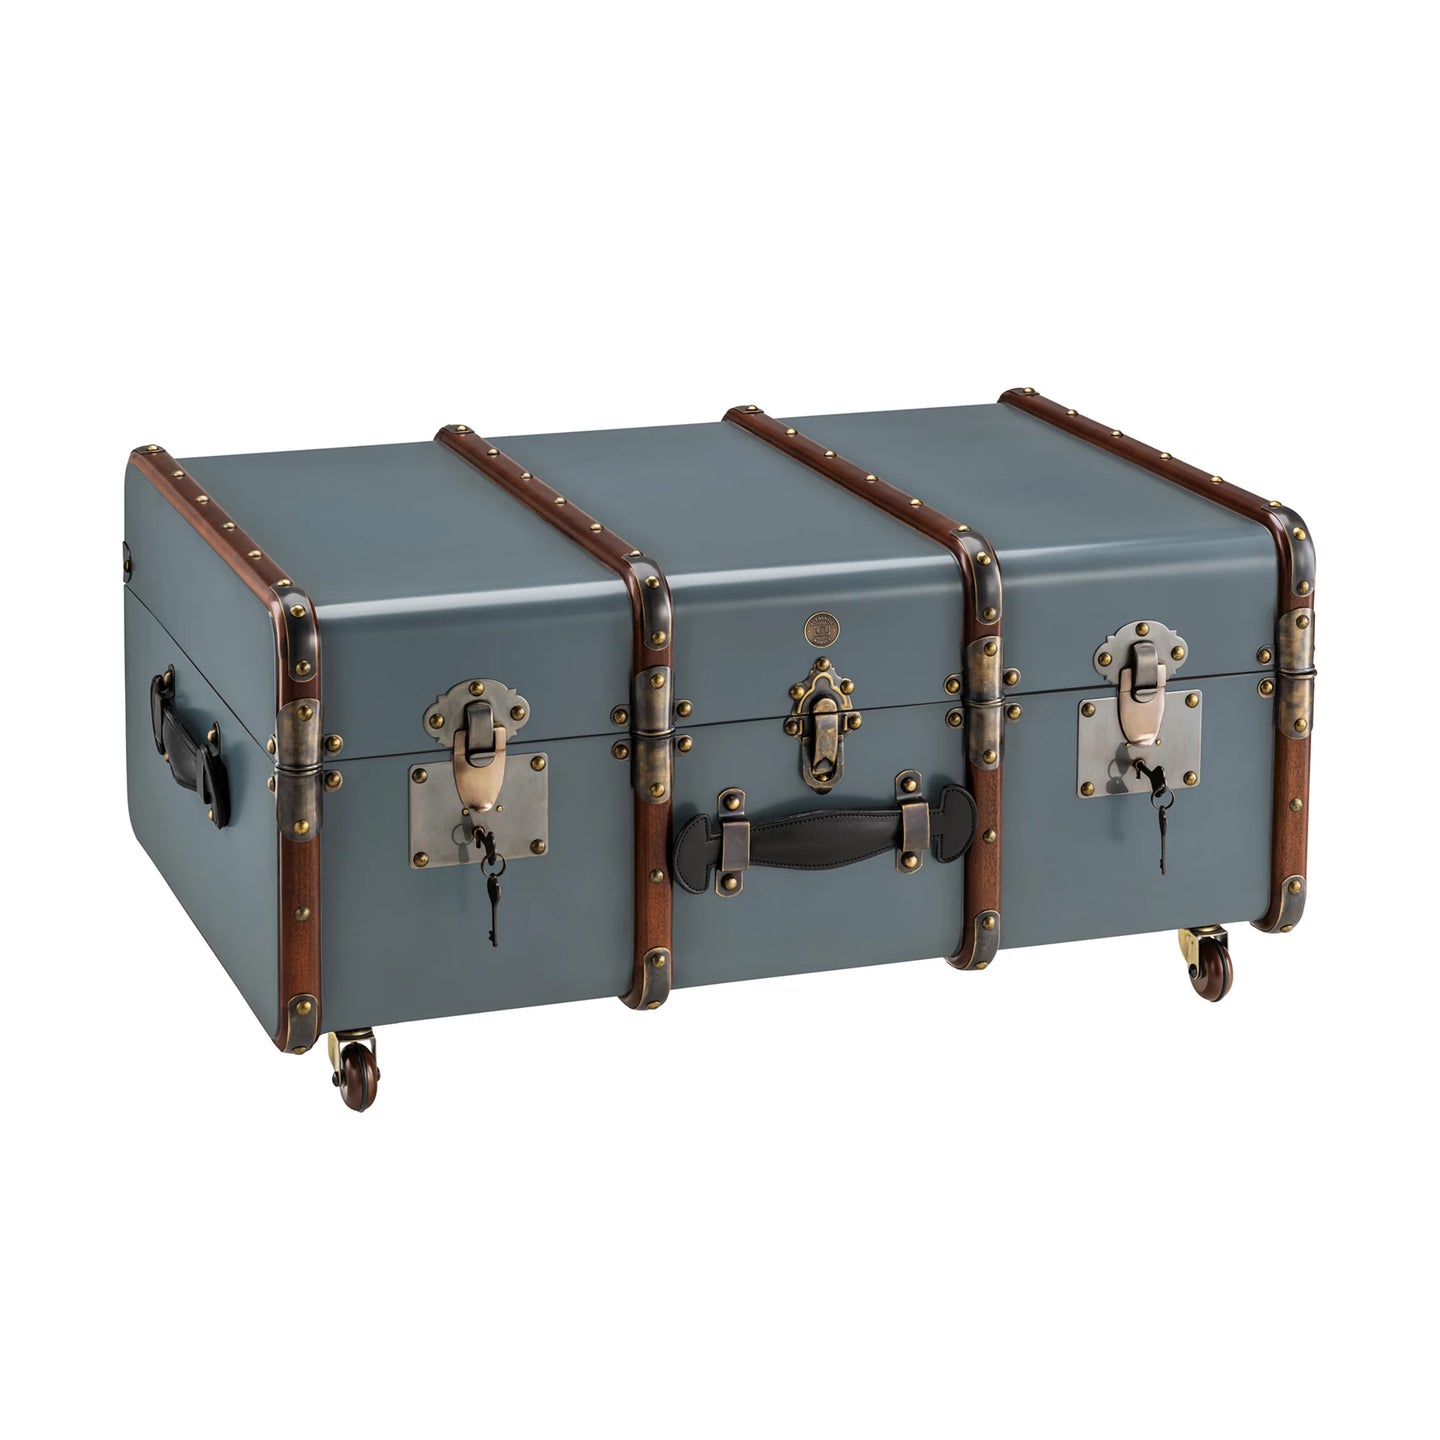 Authentic Models Stateroom Trunk Table, Petrol - MF040P